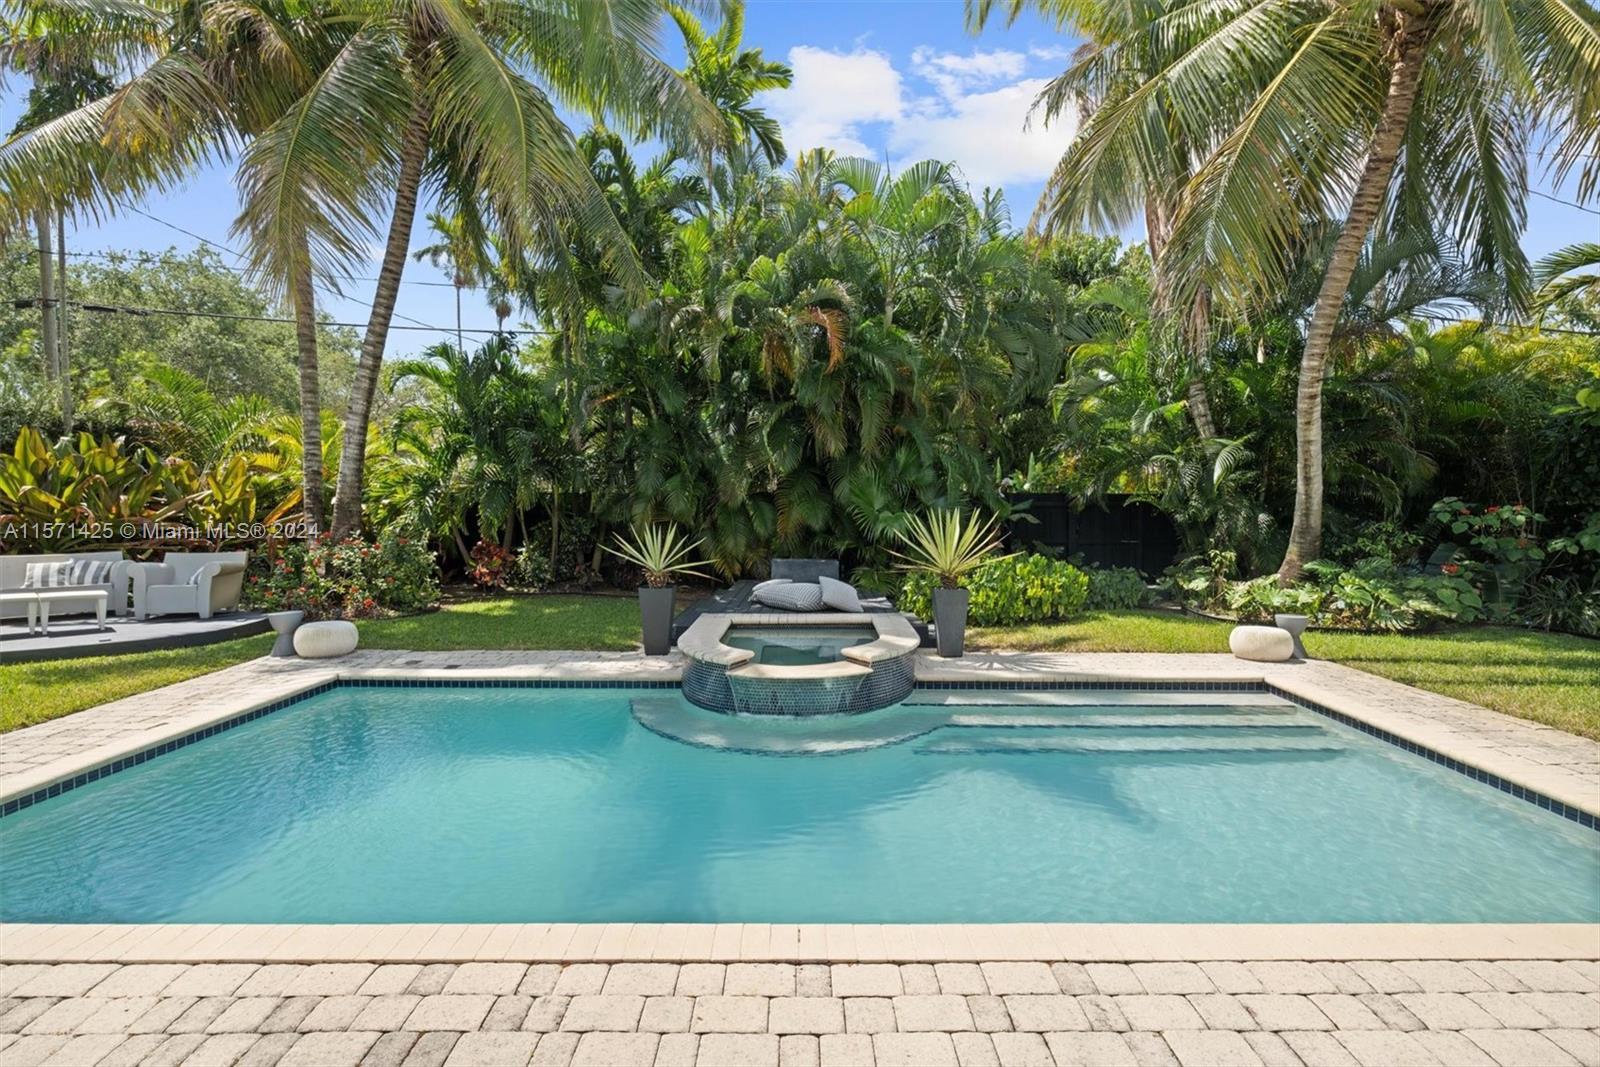 Spotless 3 bed/2 bath pool home in the heart of Miami Shores. Don't look any further! This home offe